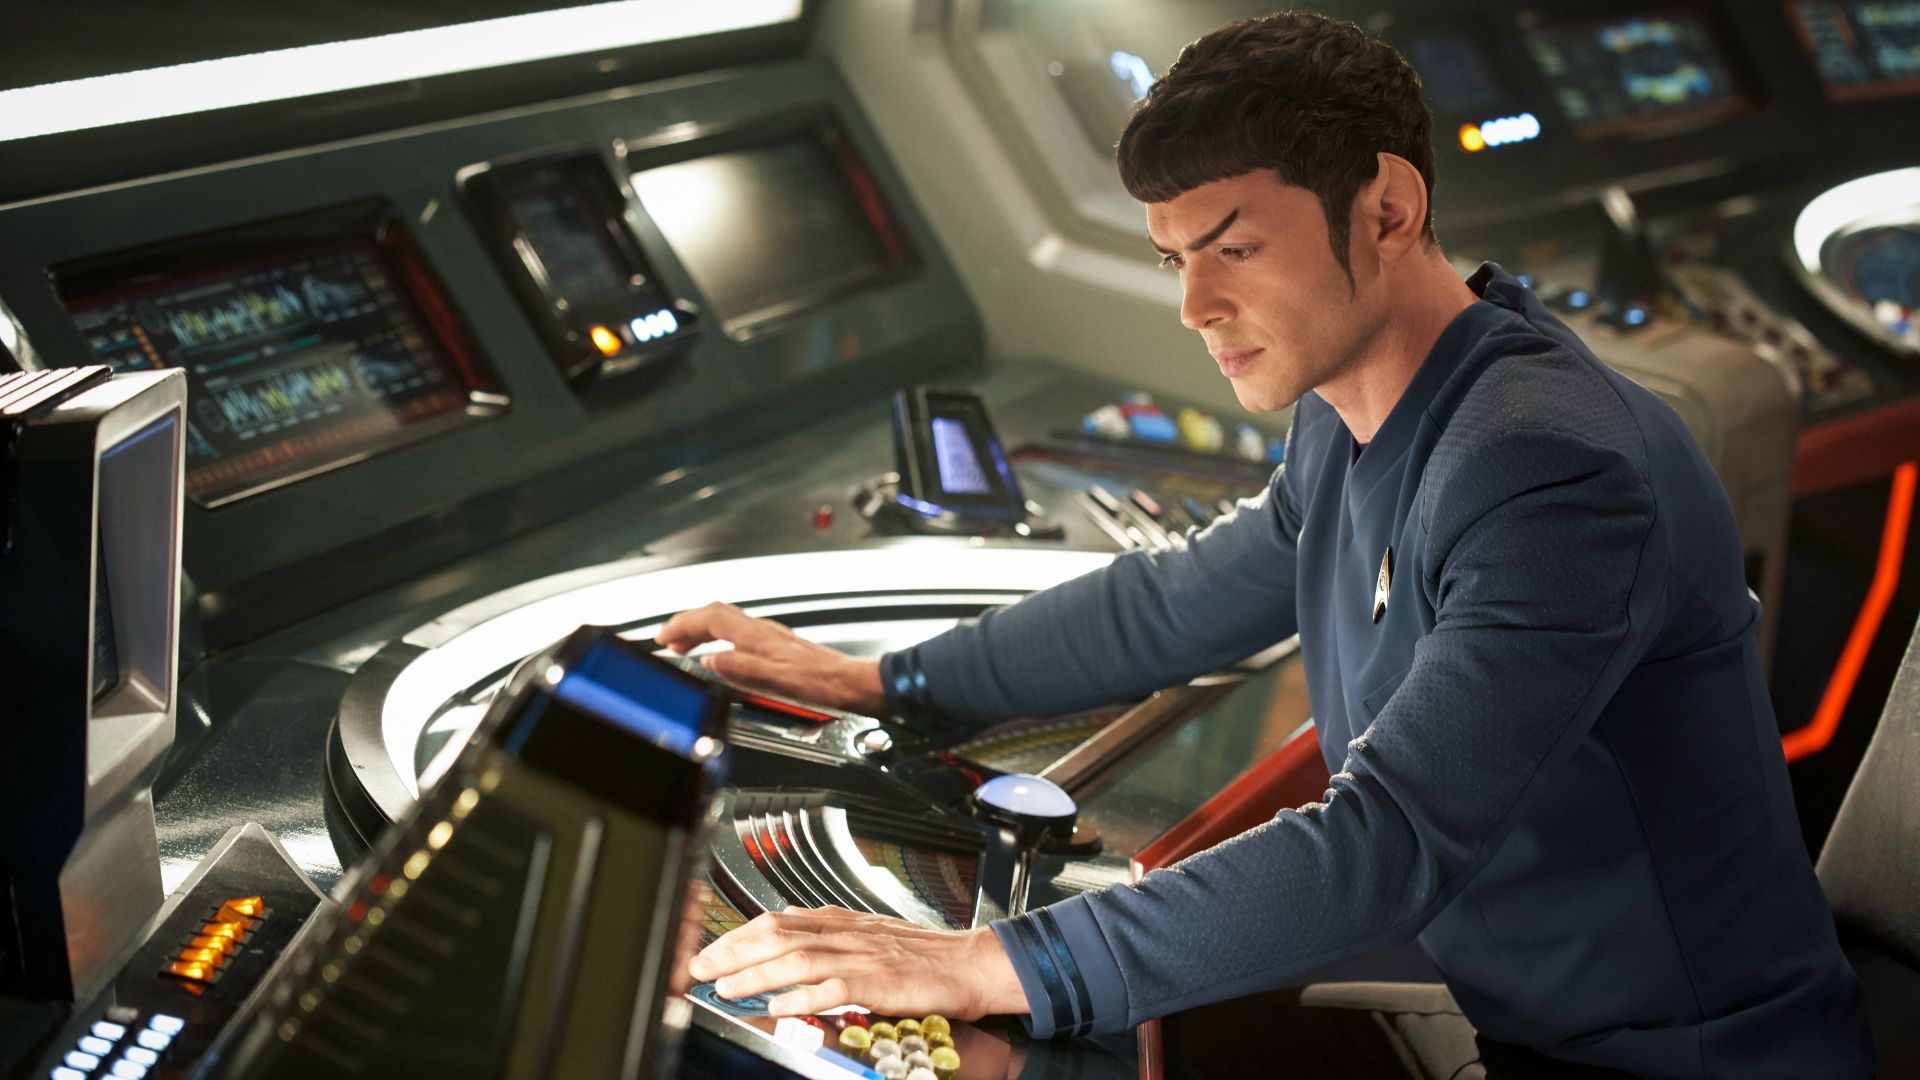 Star Trek: Strange New Worlds episode 2 review: “This incarnation of Pike is well on the way to legendary status”ByRichard Edwardspublished 12 May 22Review